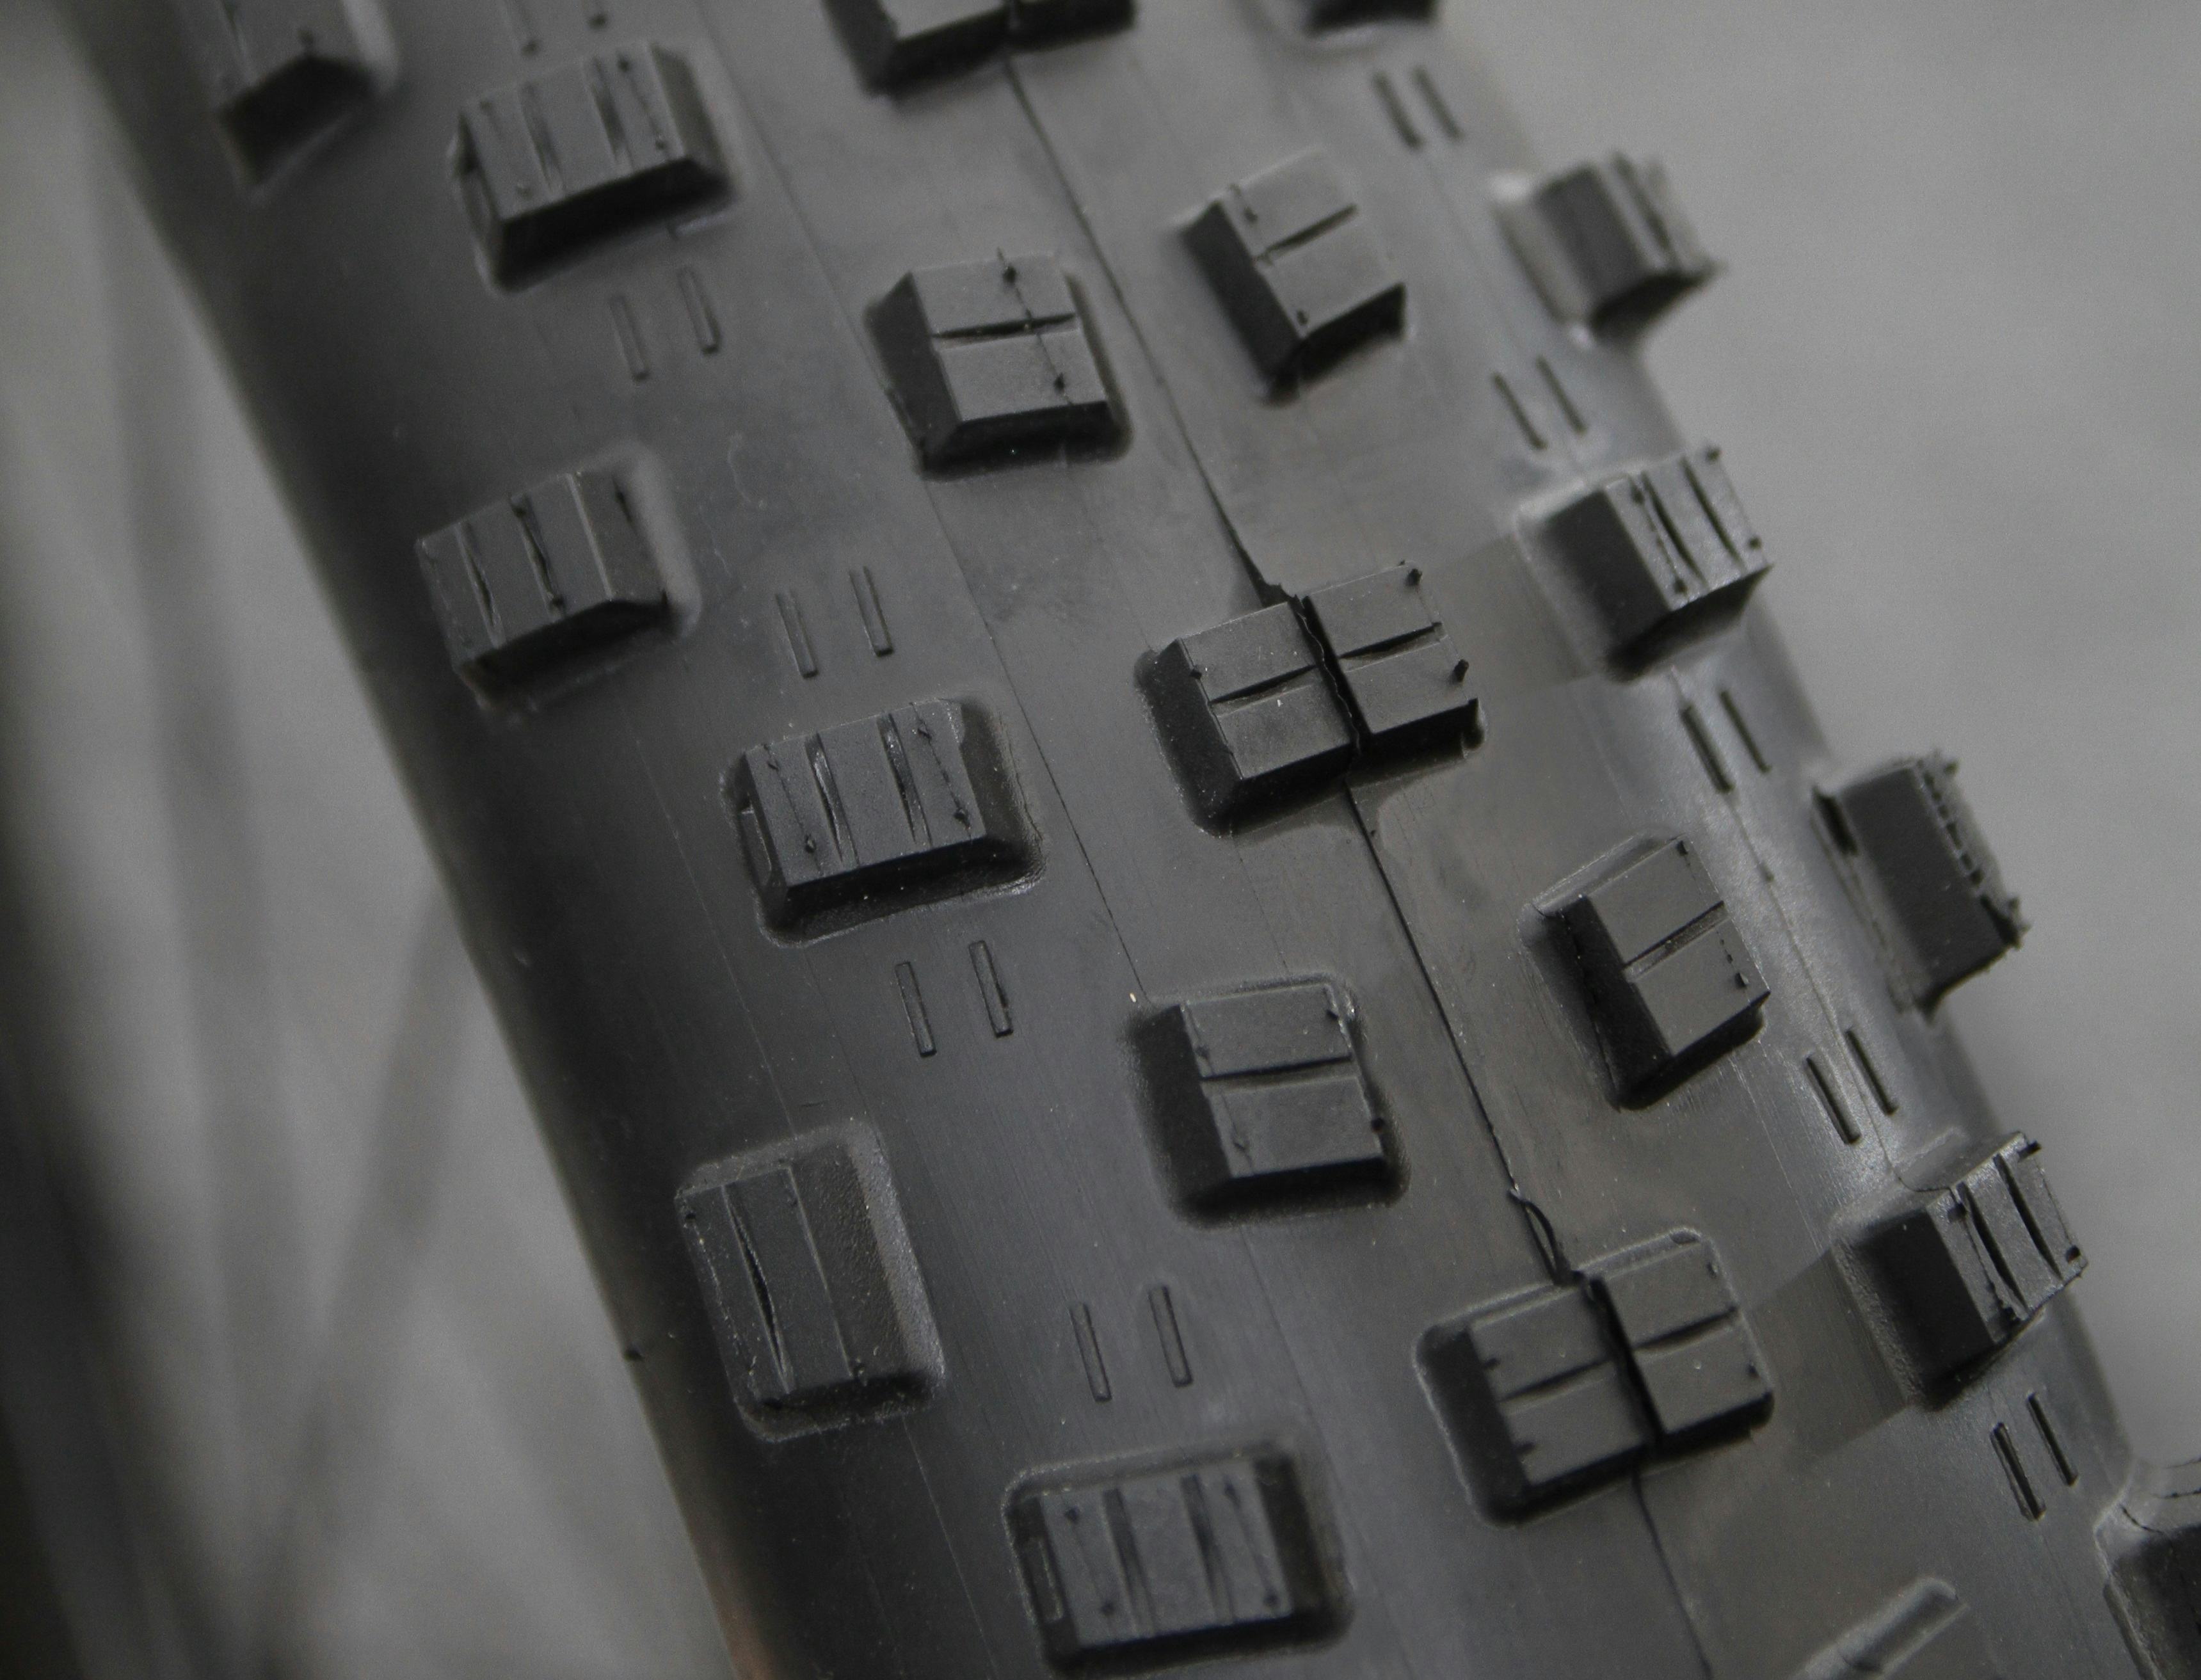 Wider ‘plus’ size tyres are said to provide more grip combined with the added performance of suspension. – Photo Schwalbe

